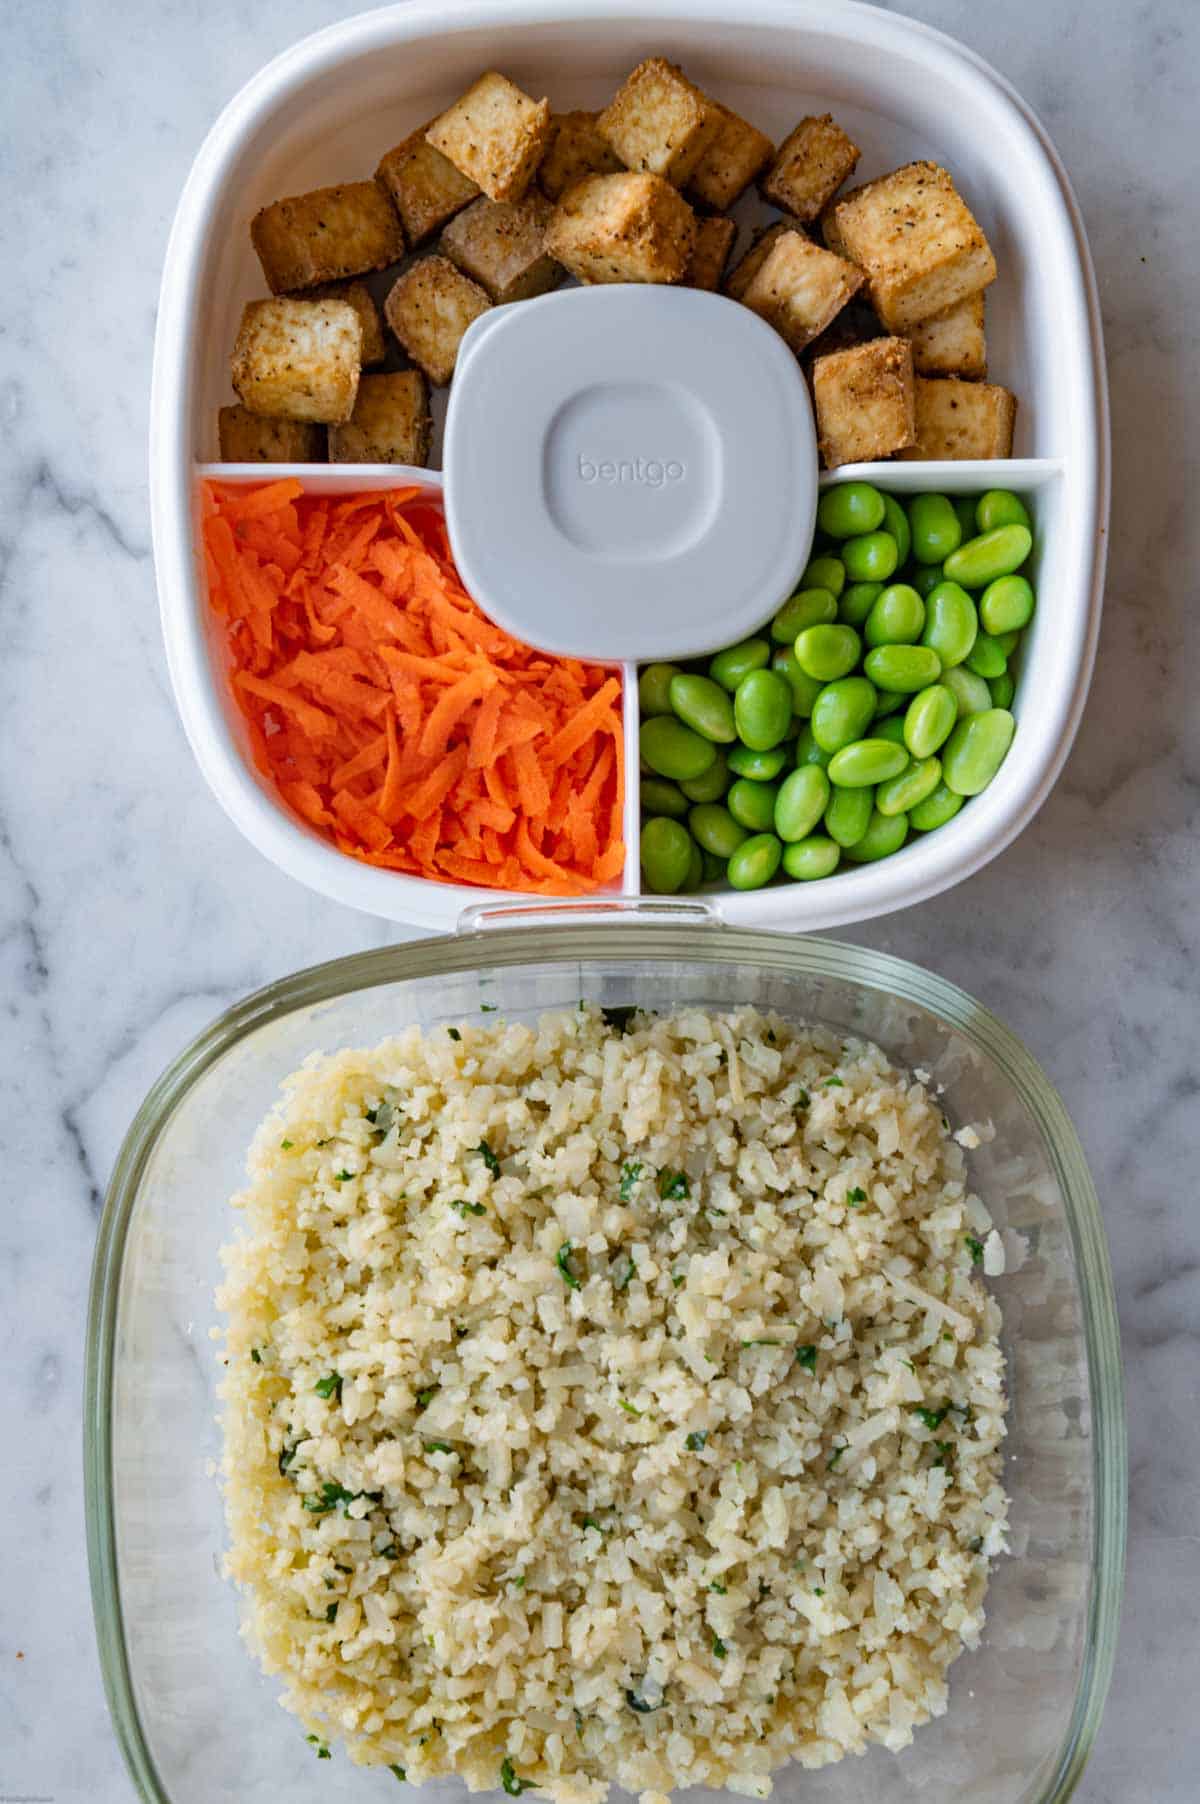 Cauliflower rice, air fryer tofu cubes, grated carrot, edamame, and peanut dressing in a bento lunch container.